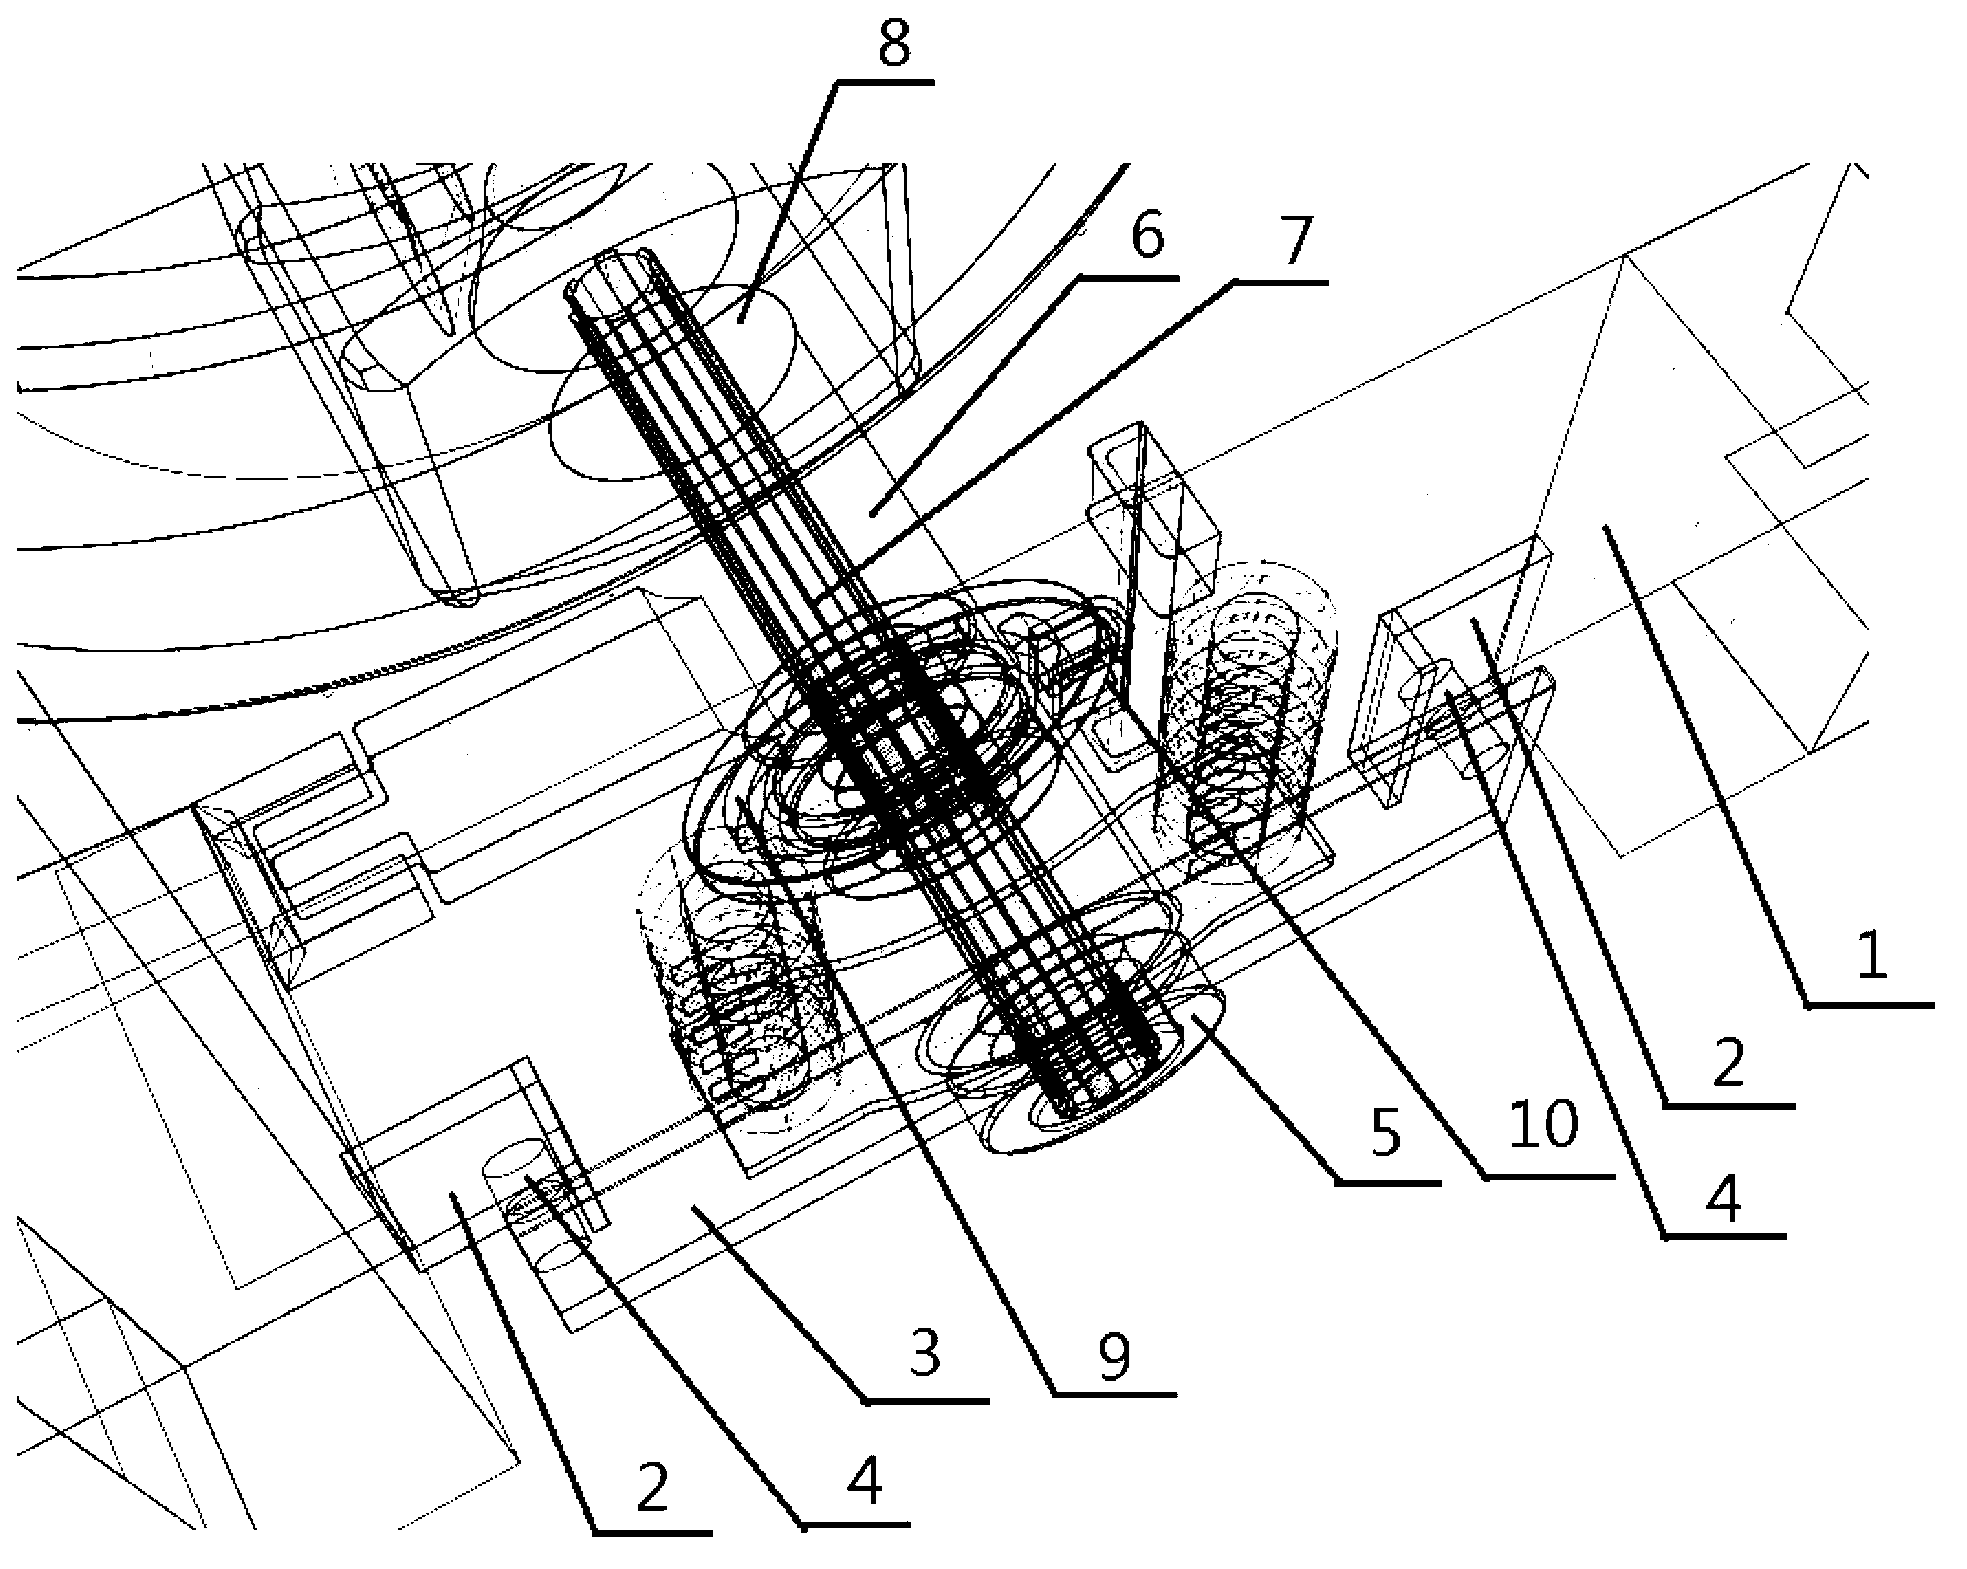 Rear axle connecting mechanism of double body vehicle